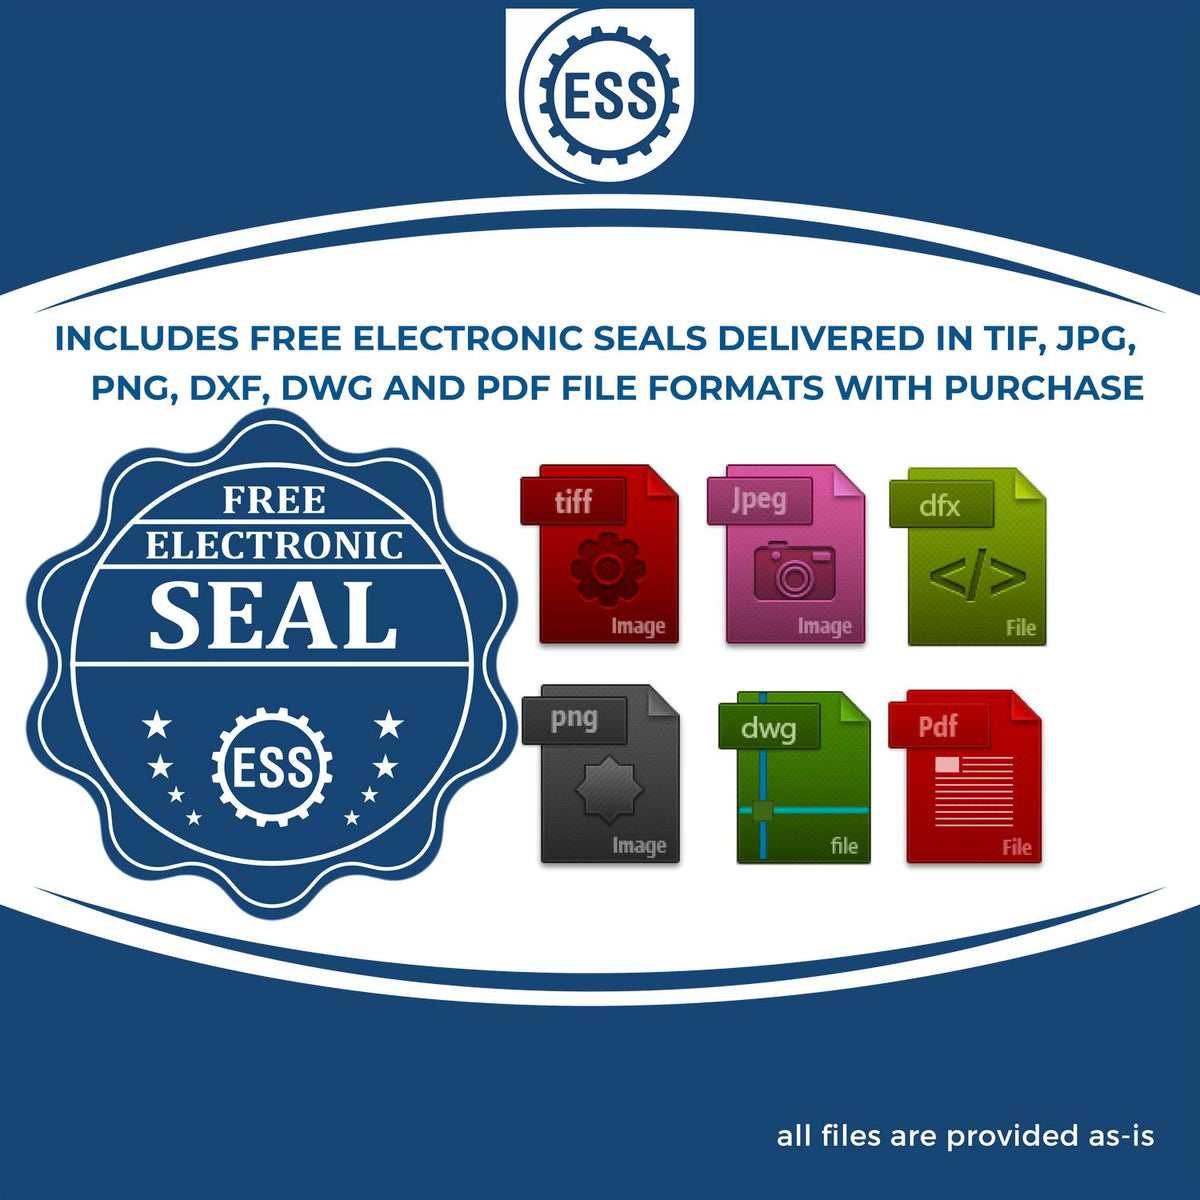 An infographic for the free electronic seal for the Long Reach Delaware Geology Seal illustrating the different file type icons such as DXF, DWG, TIF, JPG and PNG.